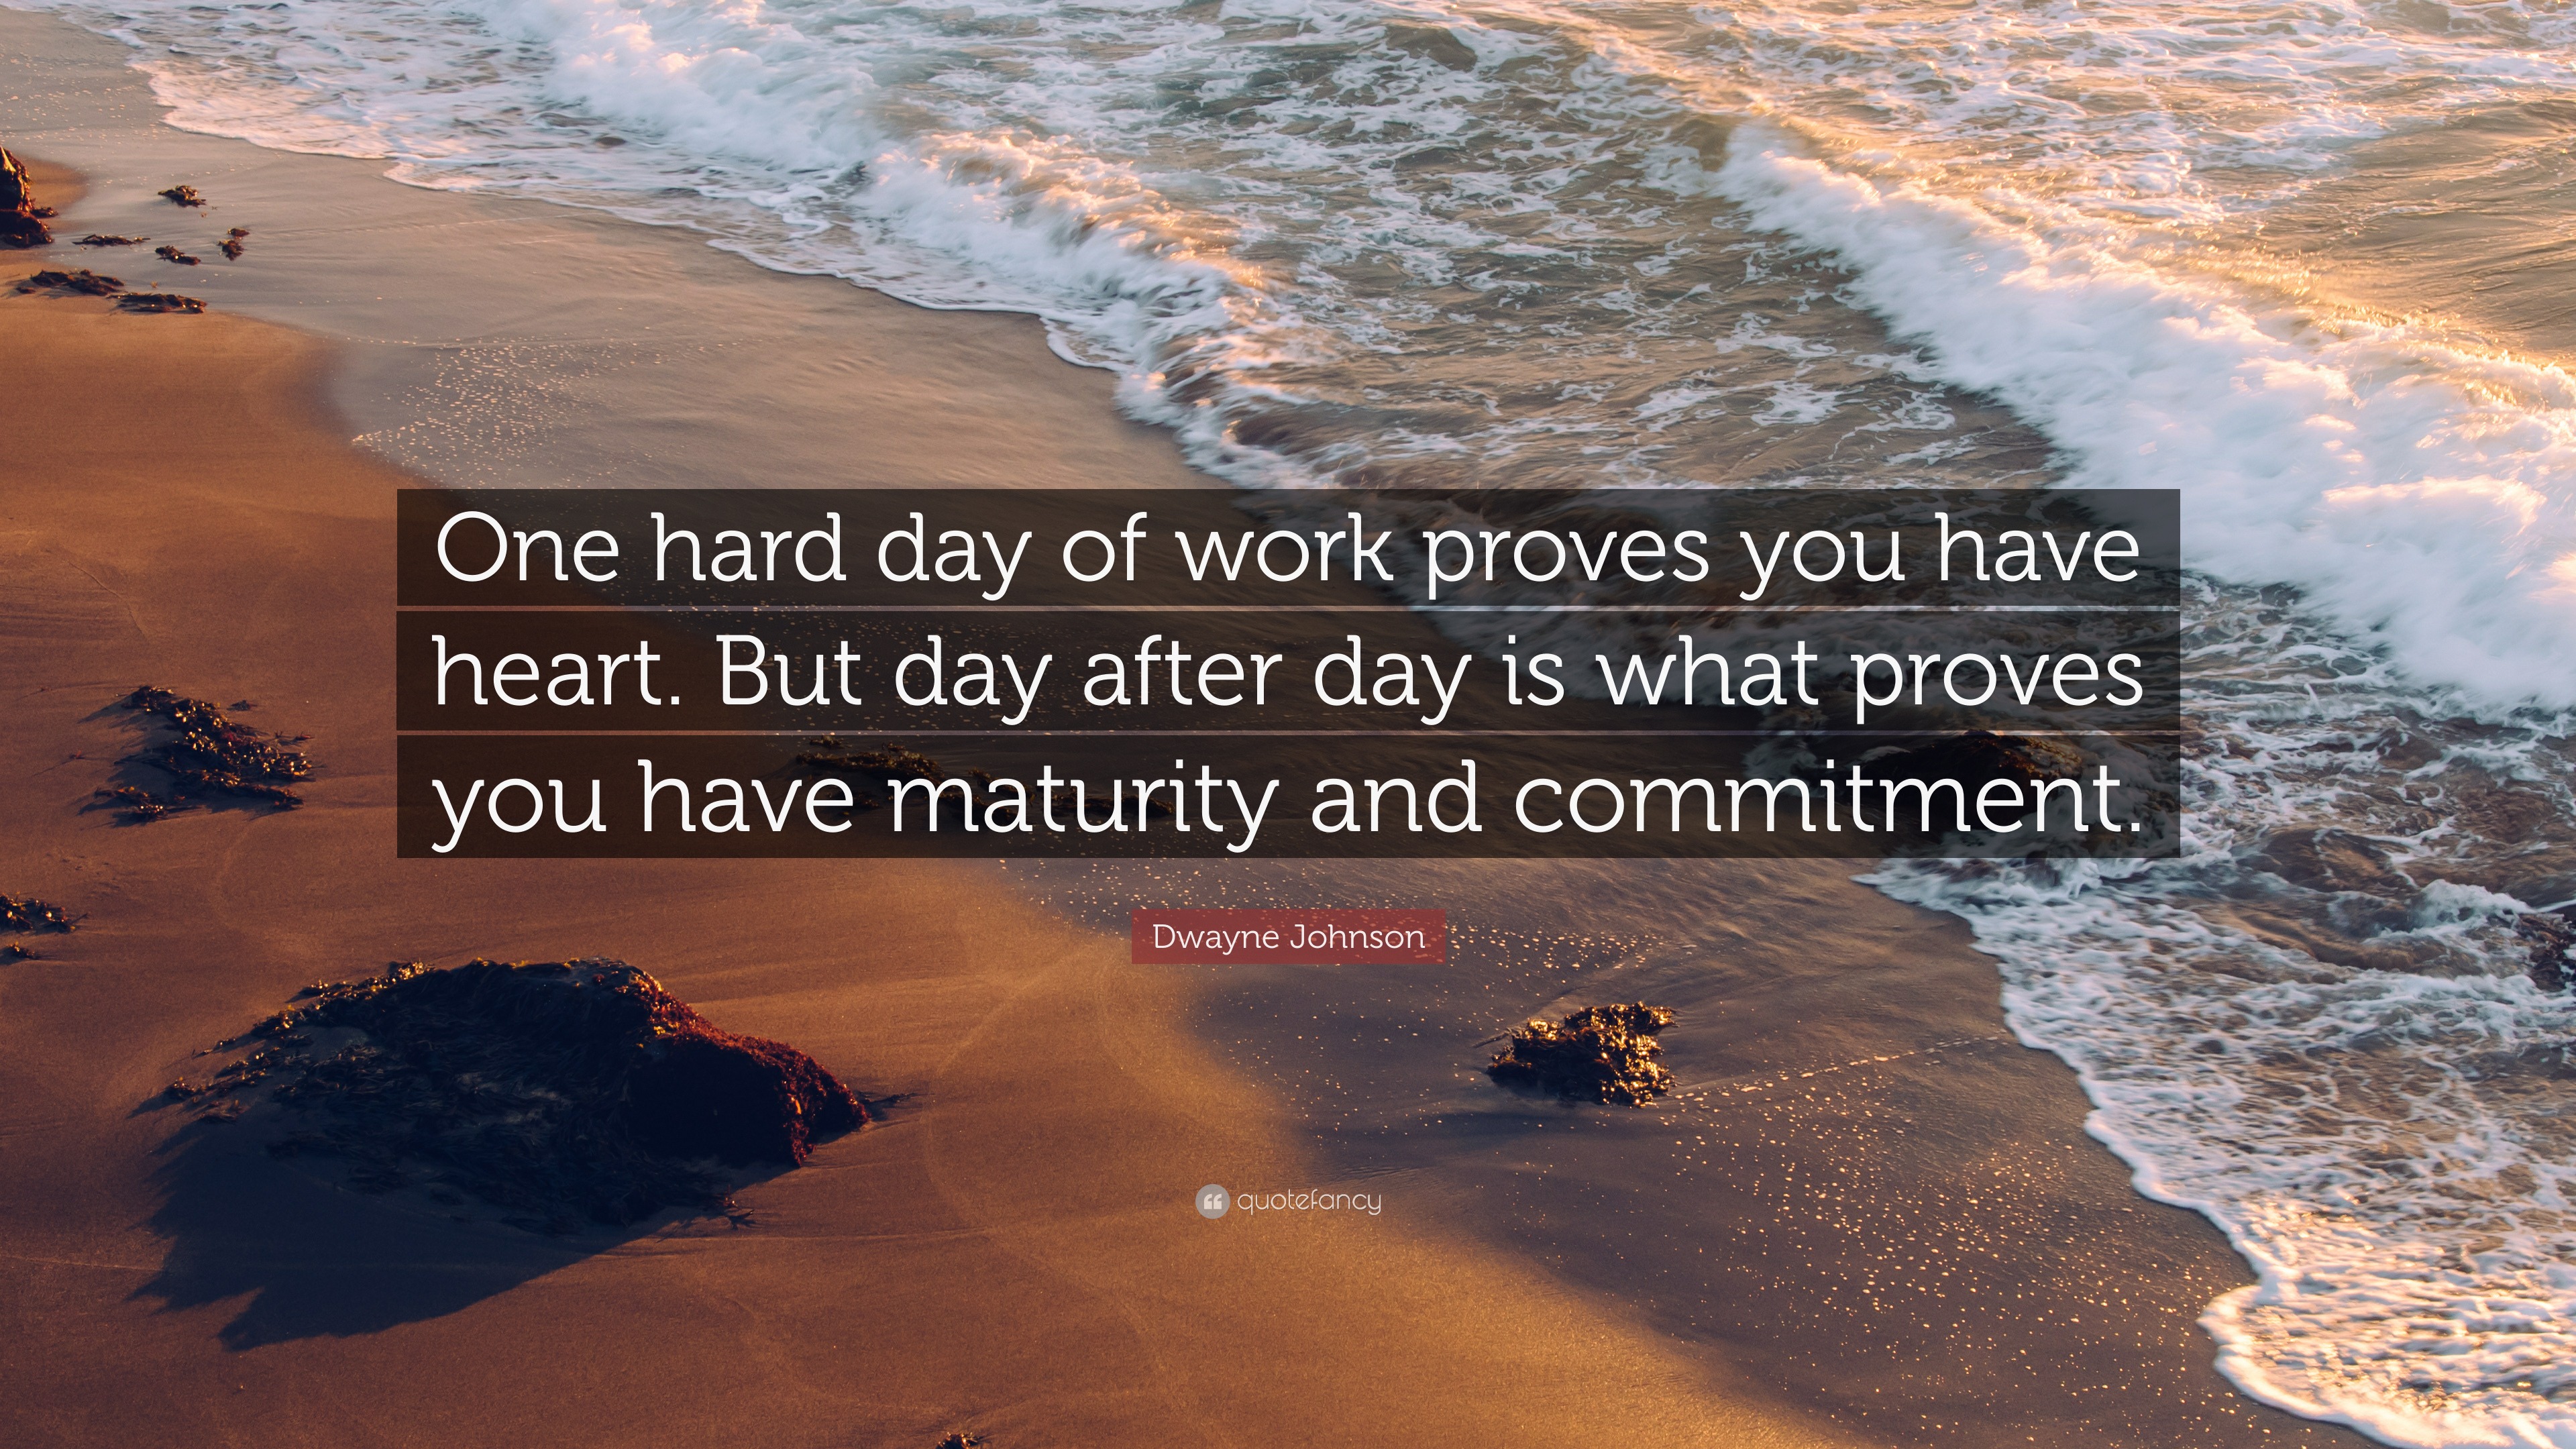 Dwayne Johnson Quote: “One hard day of work proves you have heart. But ...